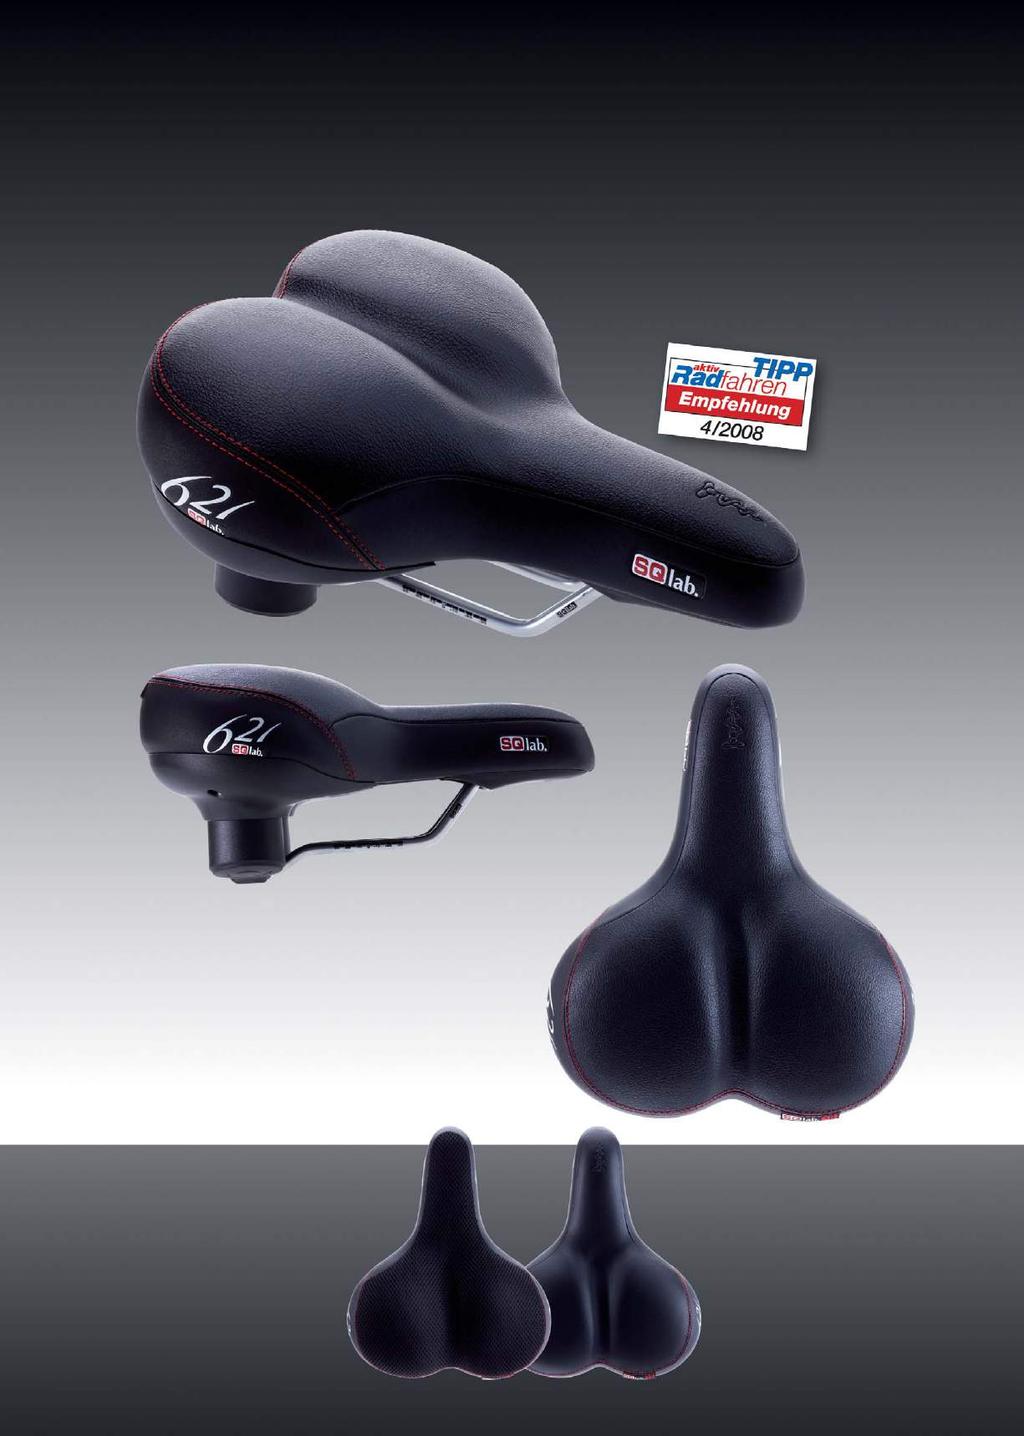 Nano CITY/COMFORT Those using a bicycle daily for transportation to and from work, deserve a comfortable ride. Therefore, a saddle with exceptional firm foam is a must.